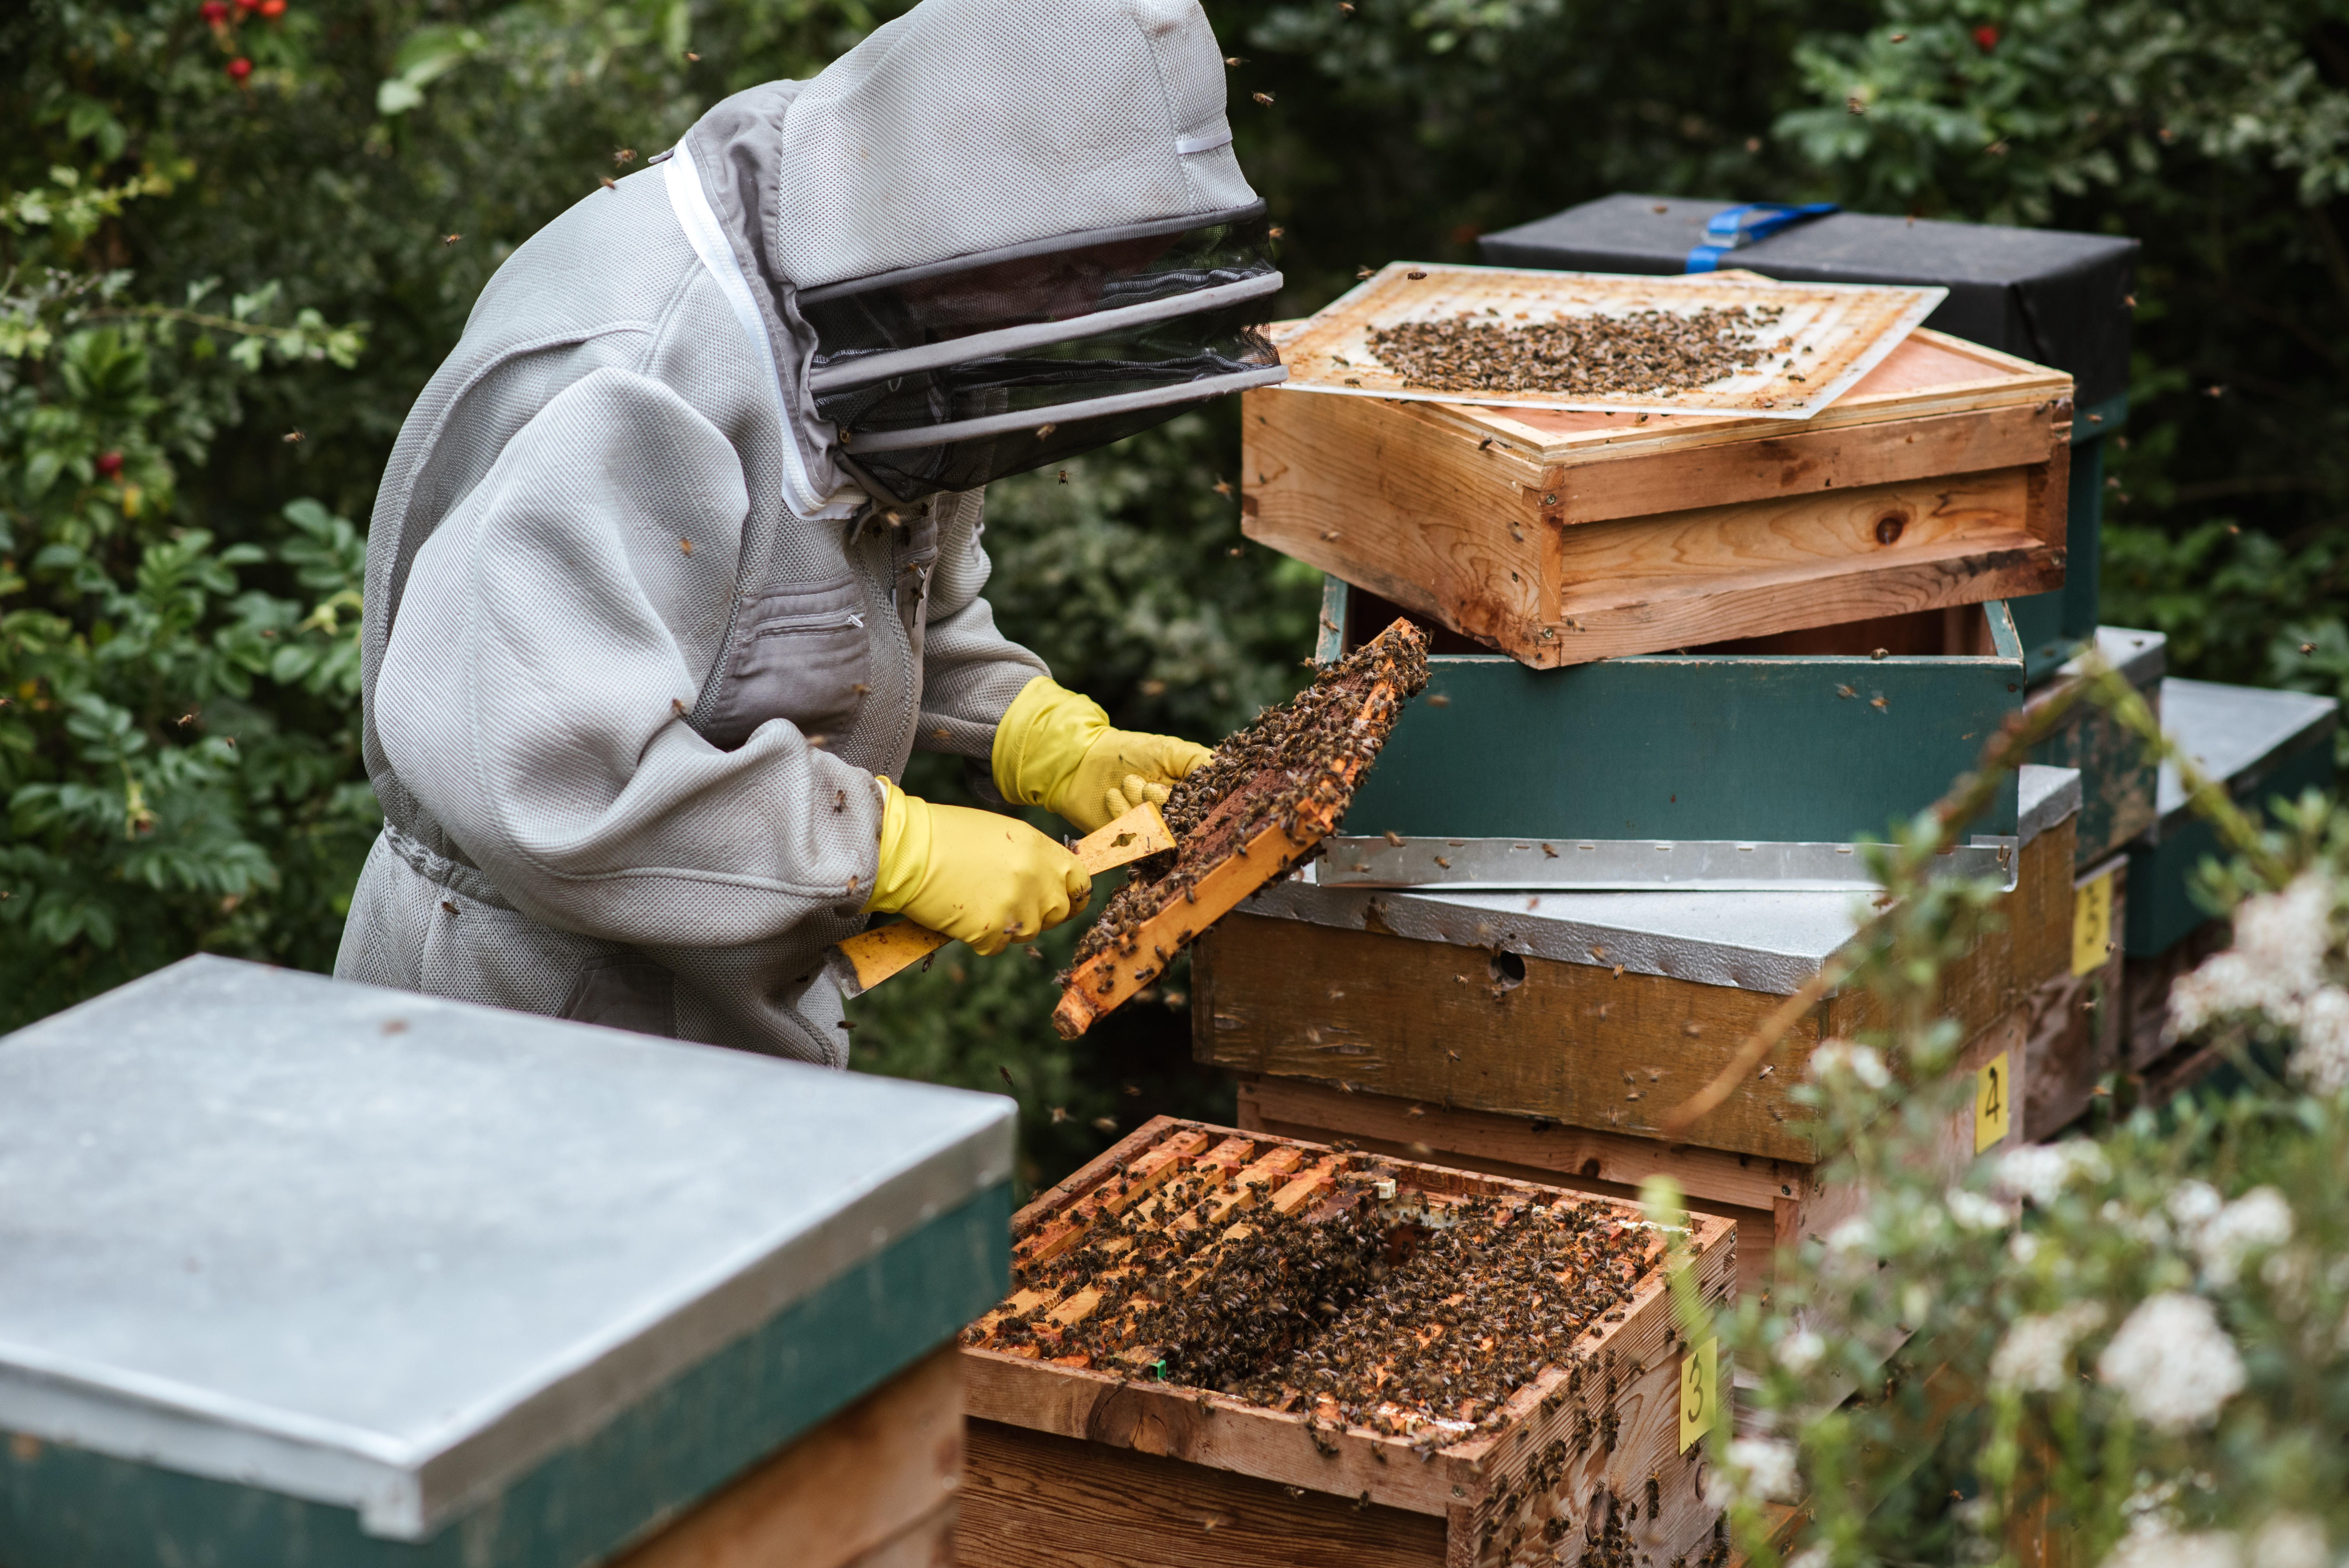 How to Start a Beekeeping Business